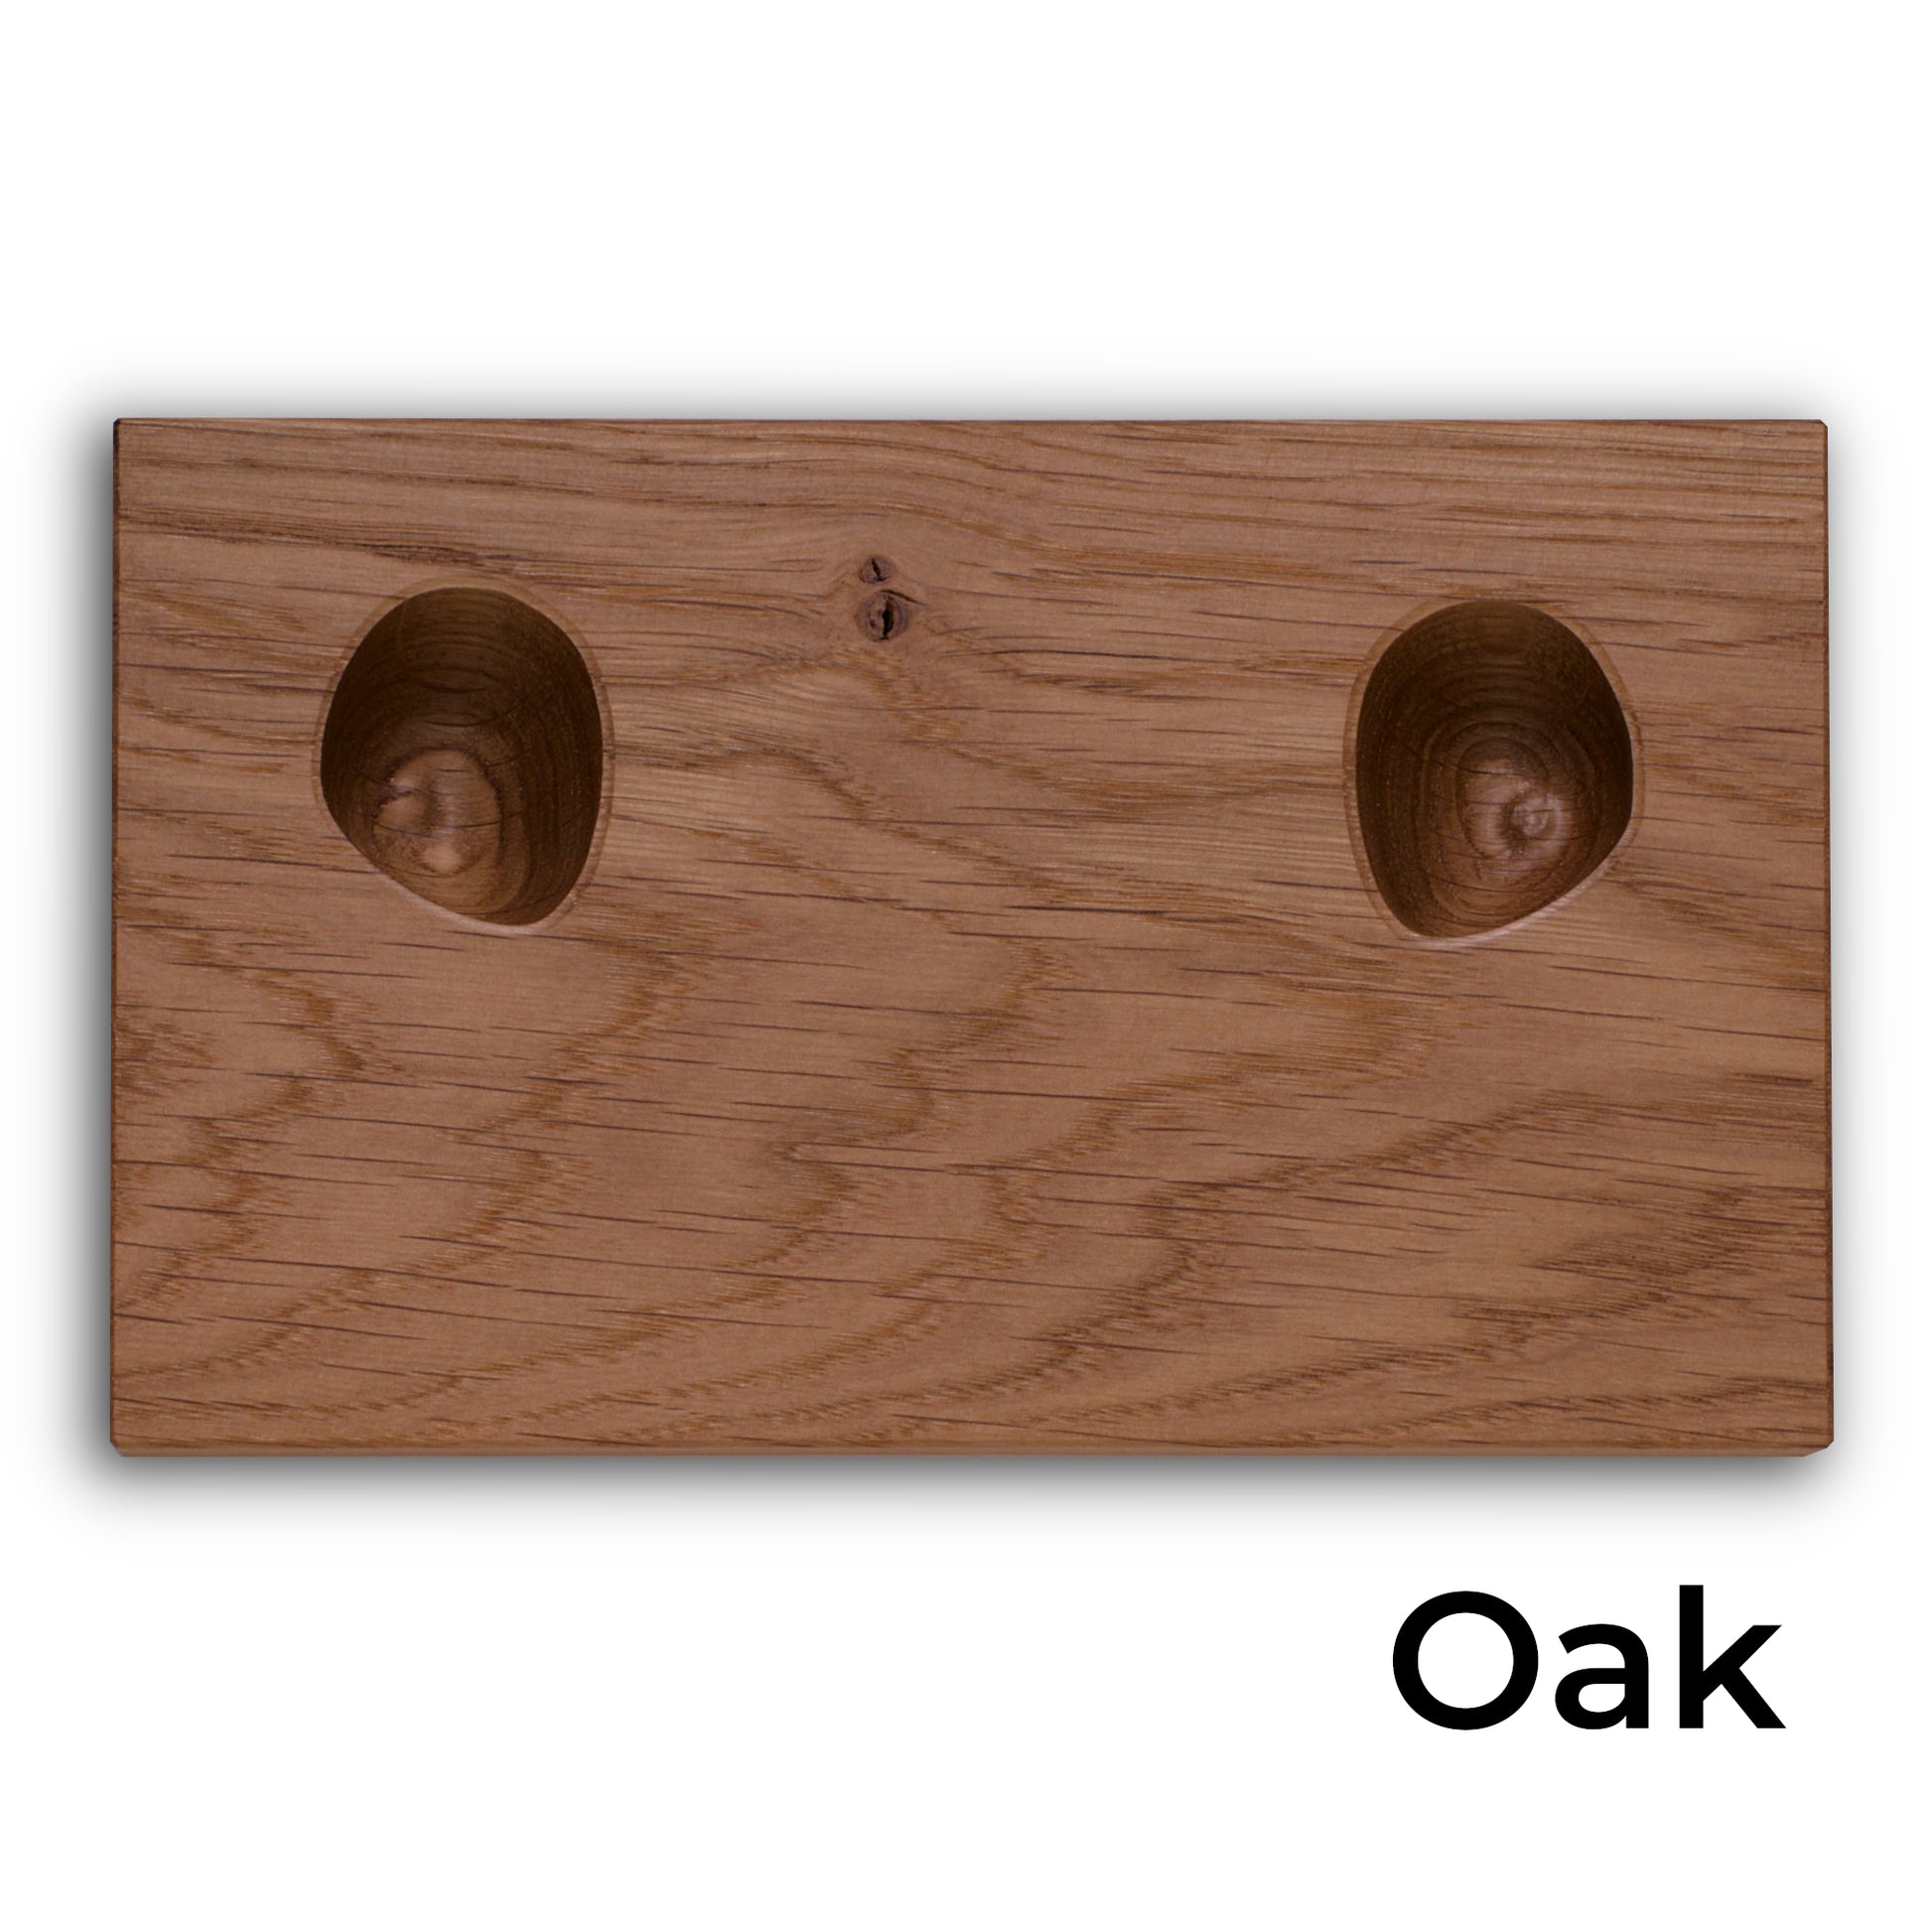 Wooden stand in oak for Xbox series X|S controller